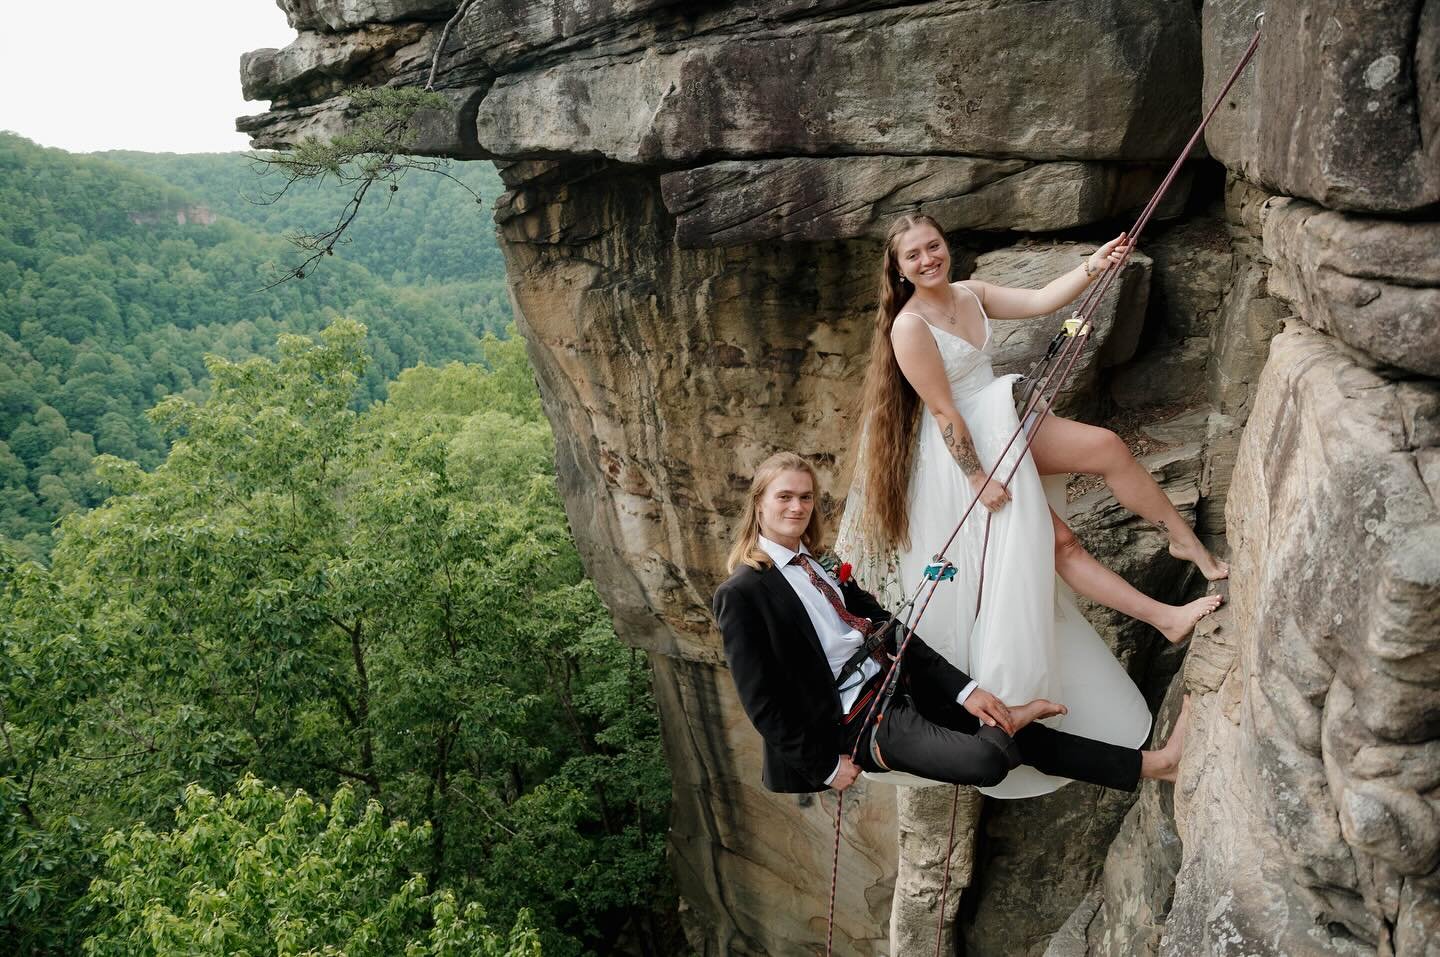 When they have engagement photos on a Thursday and elope the following Monday. Shane &amp; Alex had the most amazing cliffside elopement with an epic rappel to celebrate. I won&rsquo;t soon forget this special day. Here&rsquo;s their sneak peek.